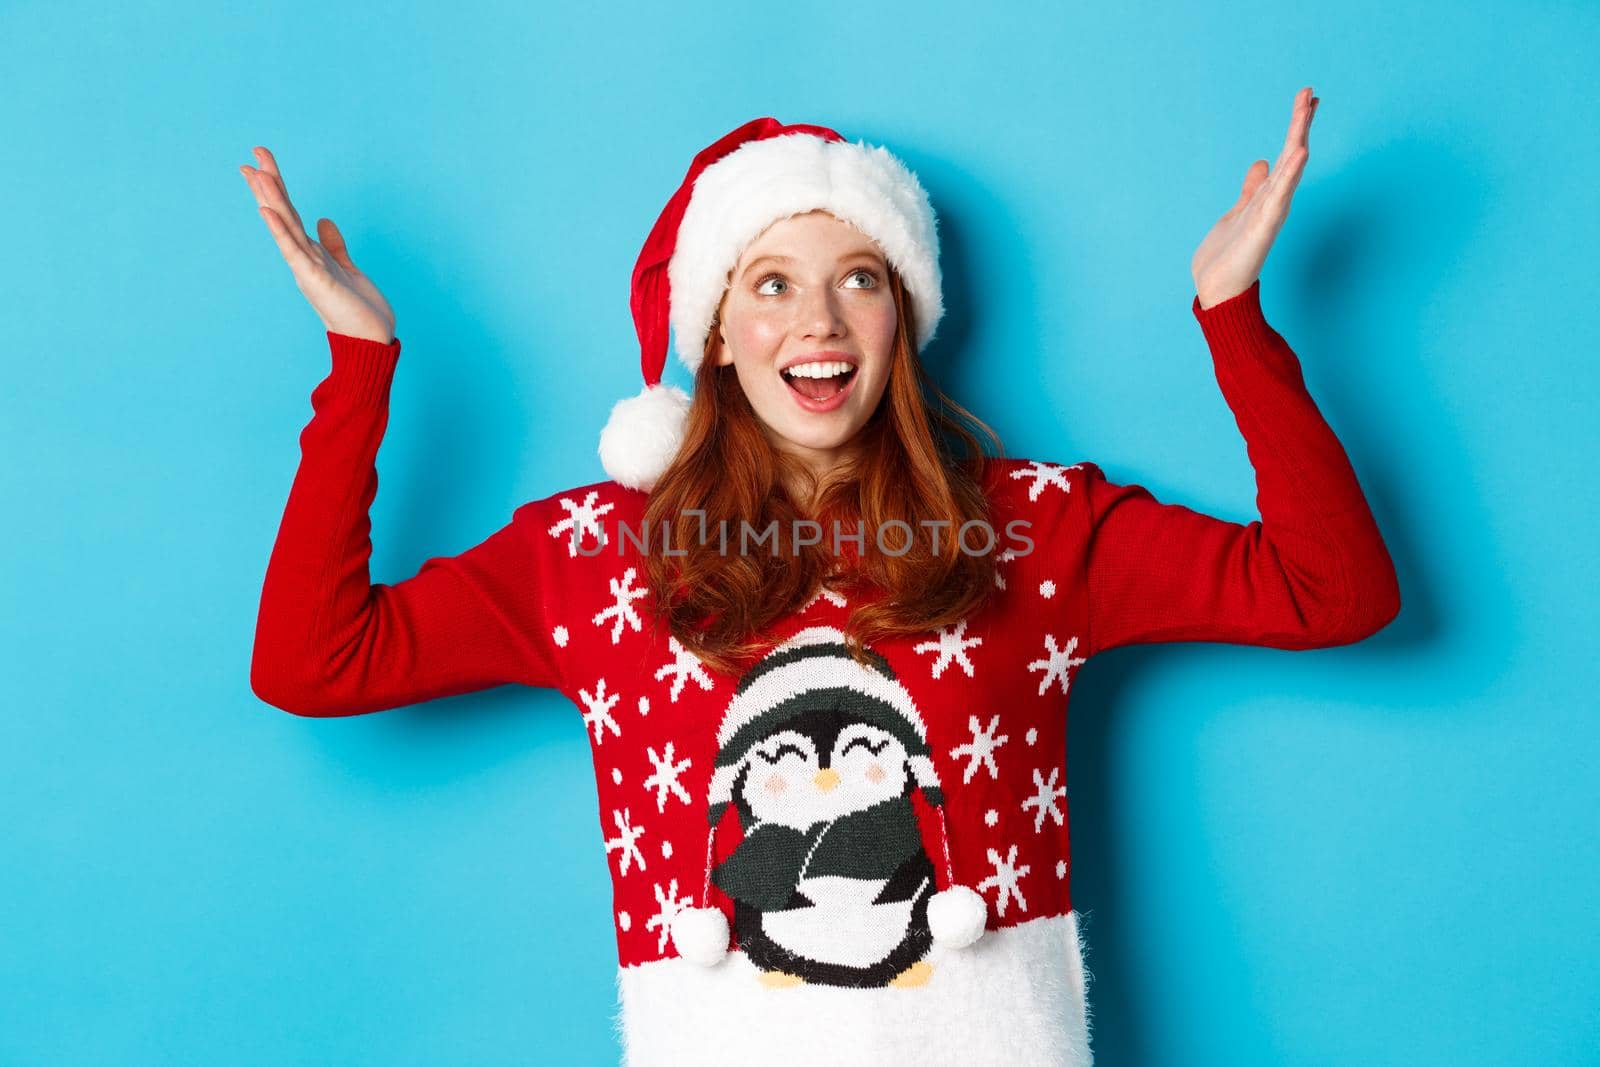 Happy holidays and Christmas concept. Excited redhead girl rejoicing of something falling on her, raising hands up delighted and smiling, wearing Santa hat with xmas sweater, blue background.